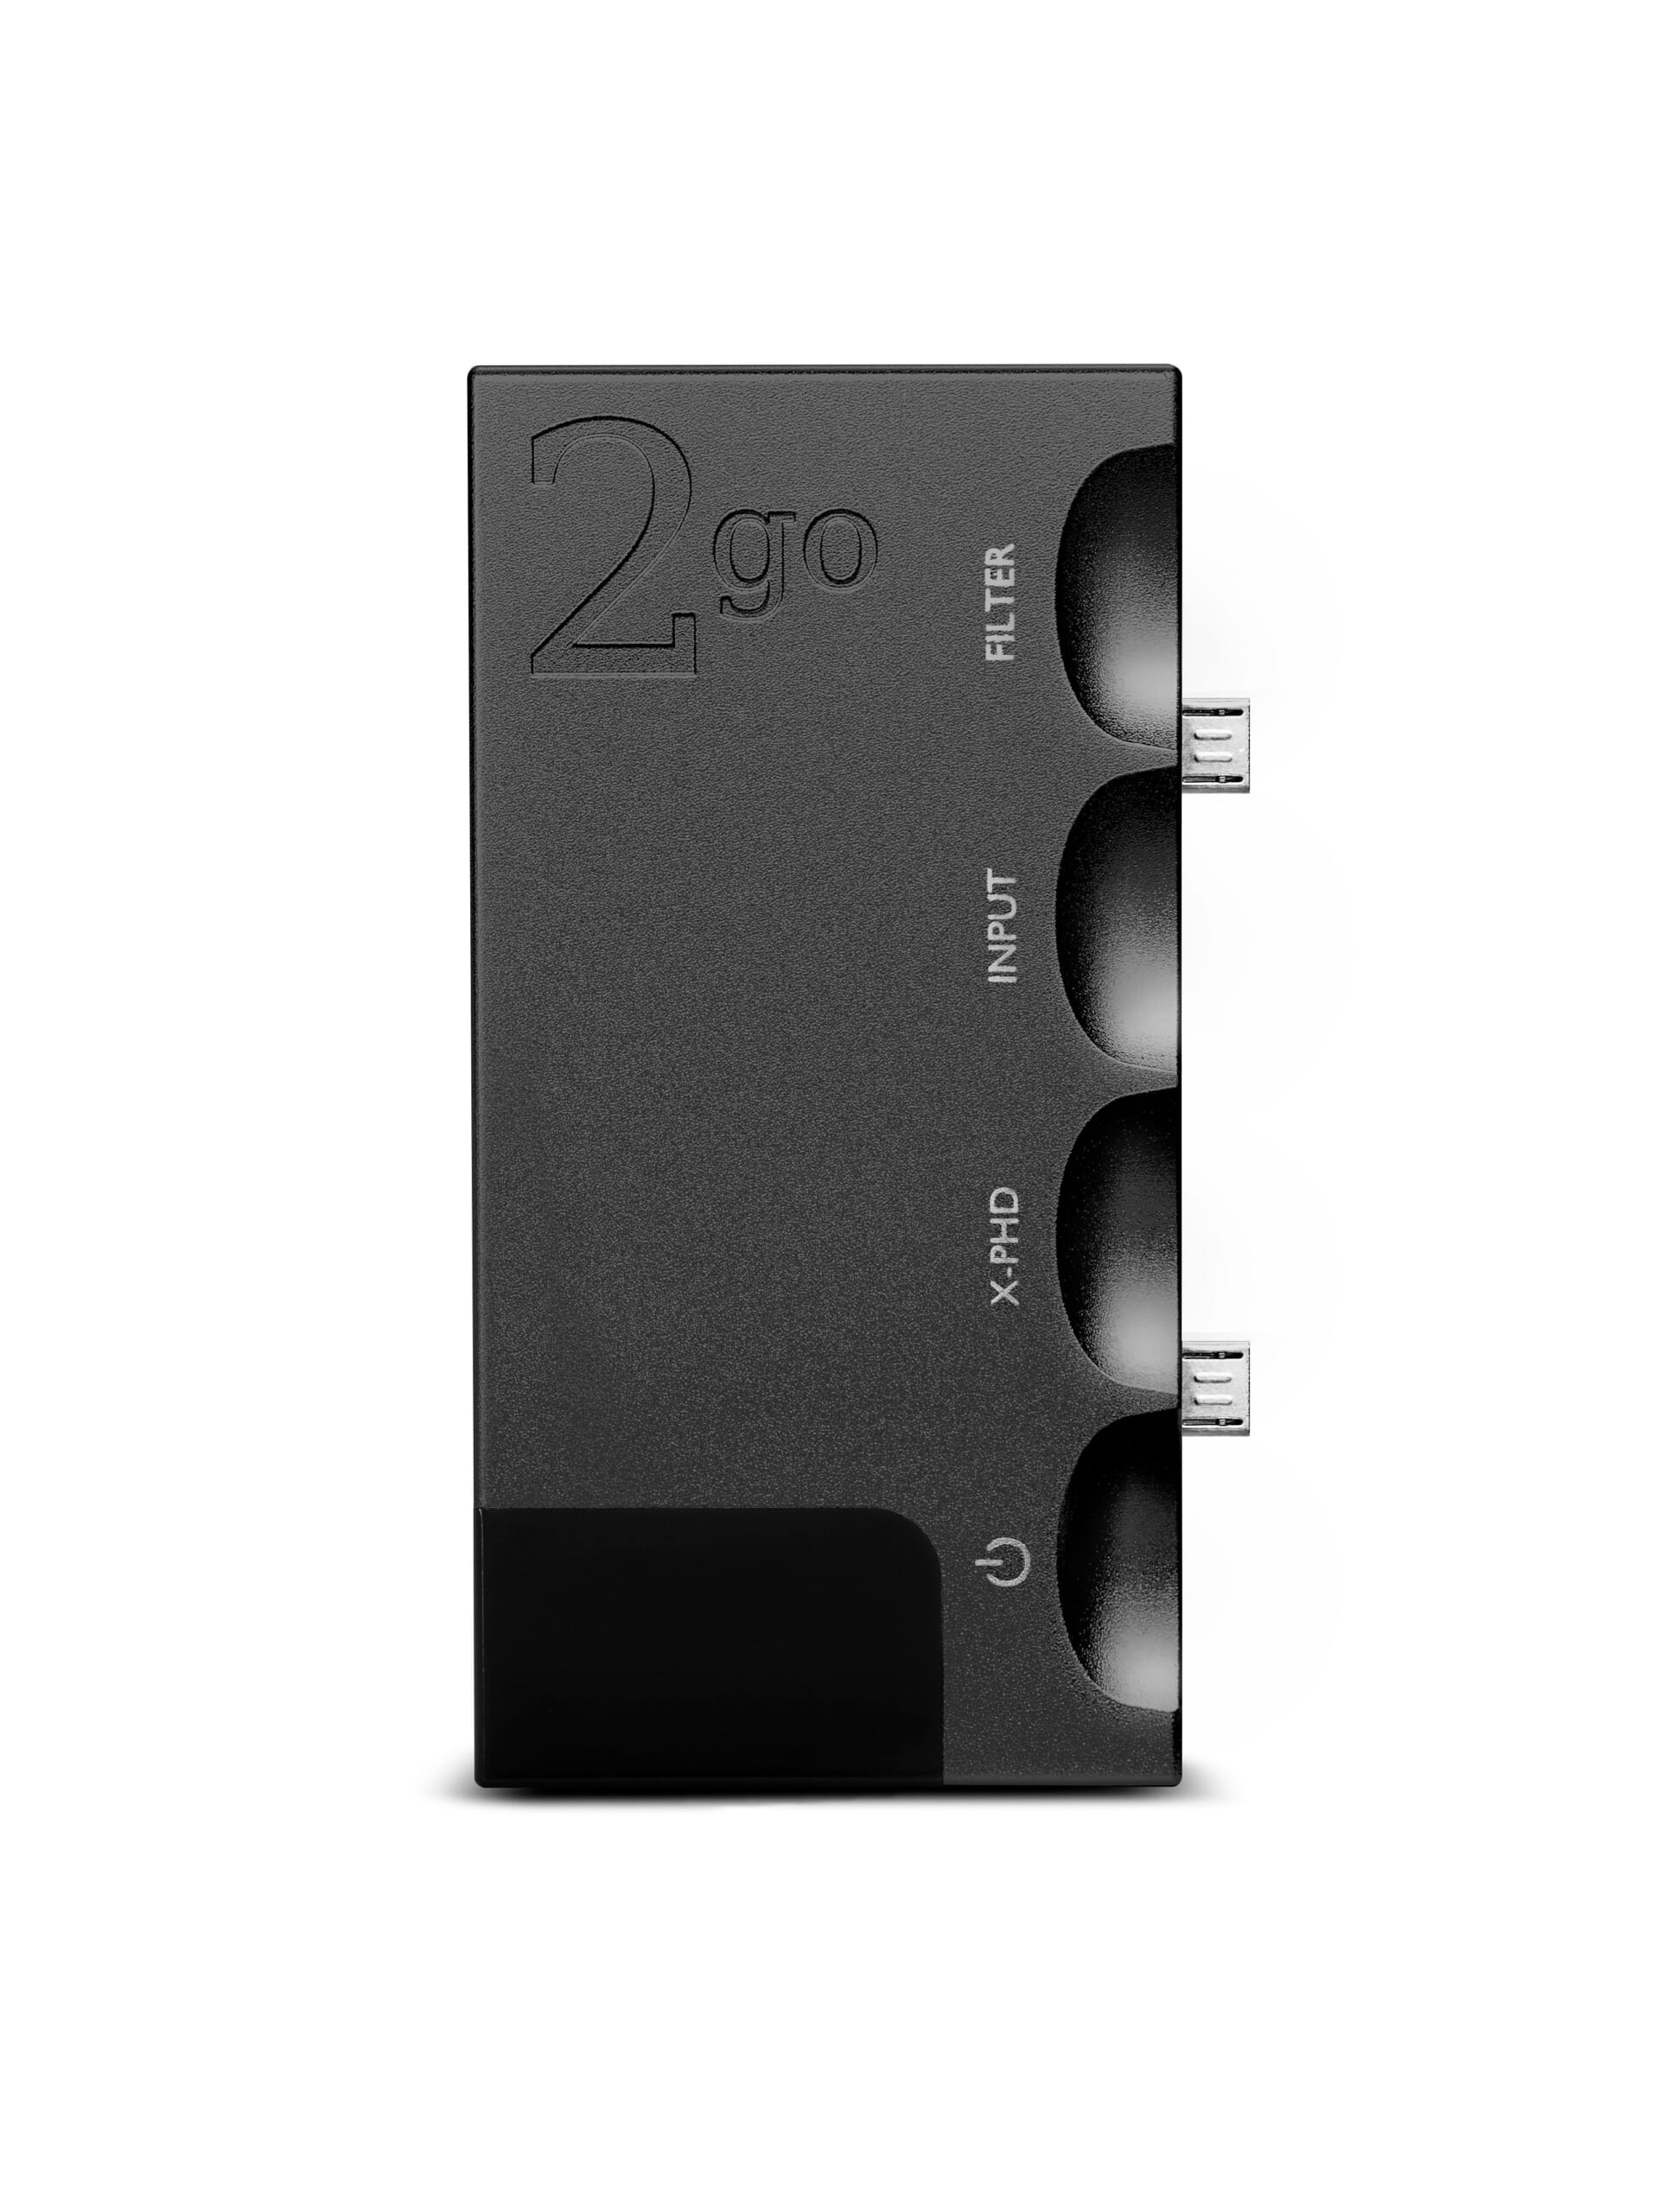 2go - Chord Electronics Japan Mobile Site